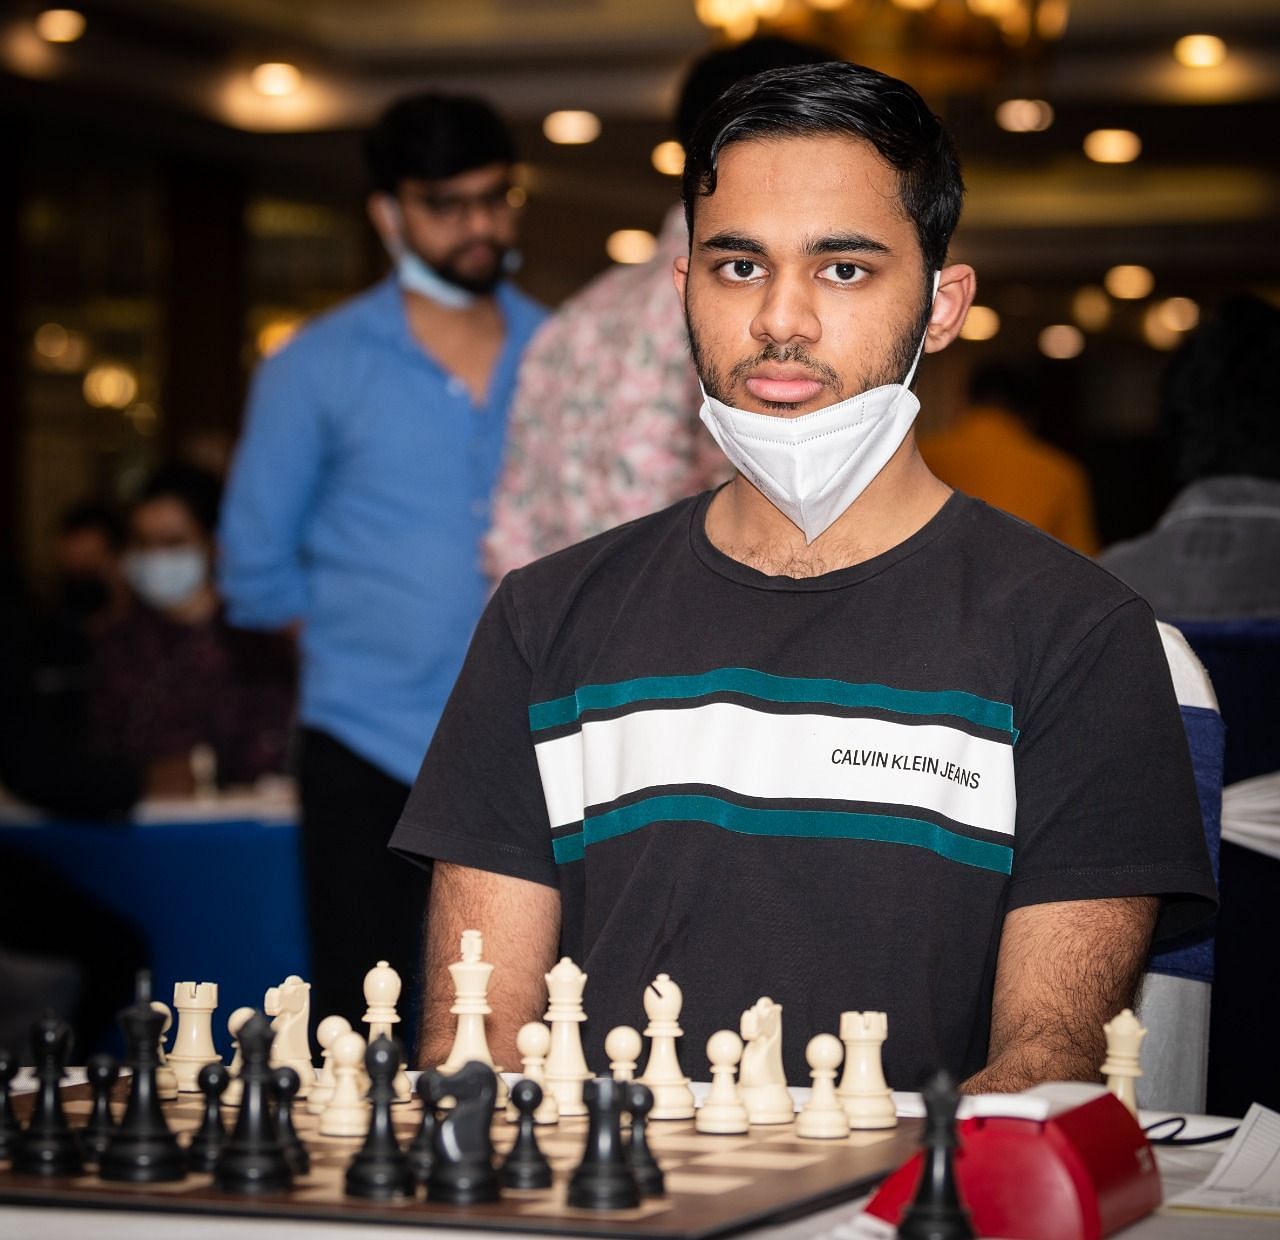 Top seed GM Arjun Erigaisi beat Kushagra Jain in the fourth round on Thursday. (Pic credit: AICF)